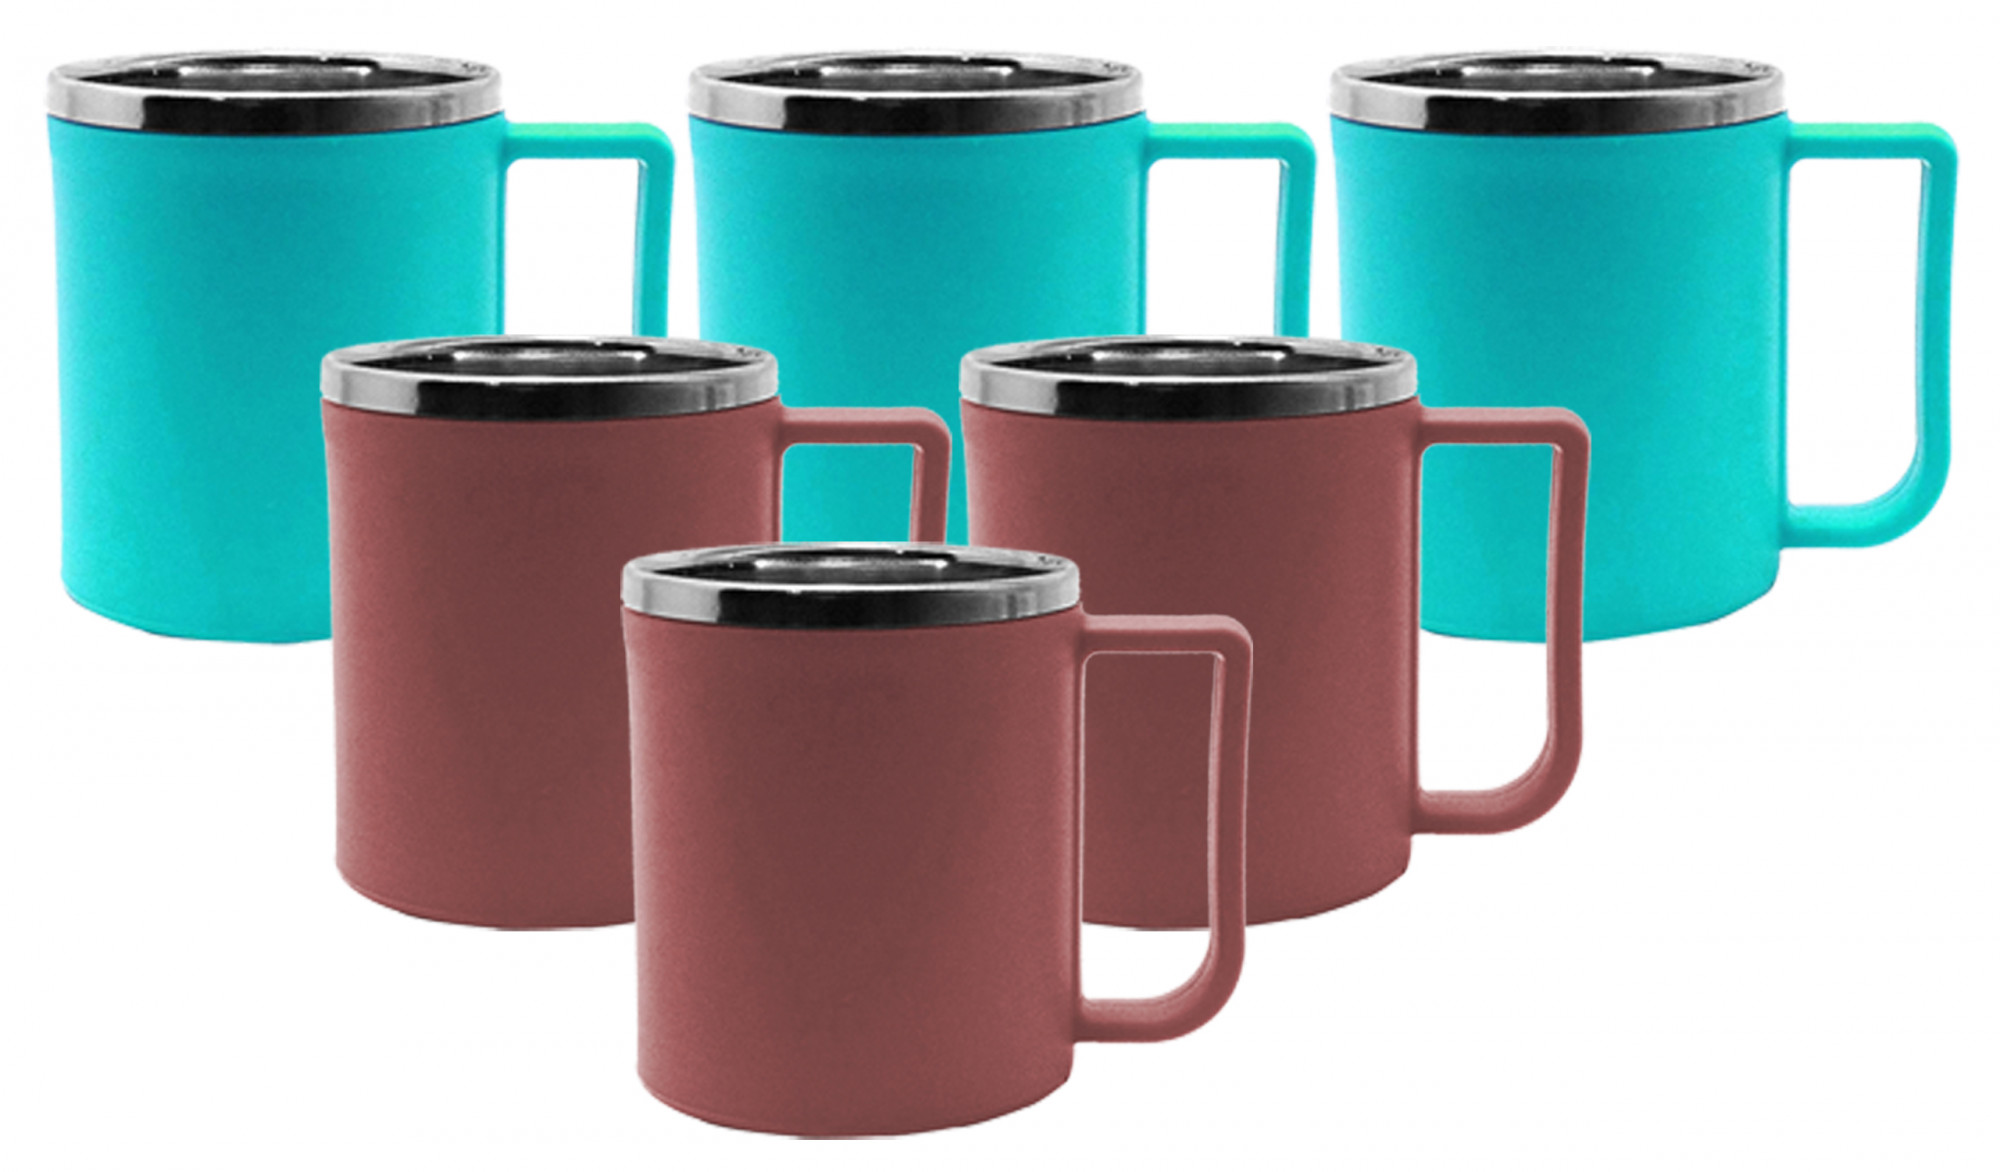 Kuber Industries Plastic Steel Cups for Coffee Tea Cocoa, Camping Mugs with Handle, Portable & Easy Clean,(Green & Brown)